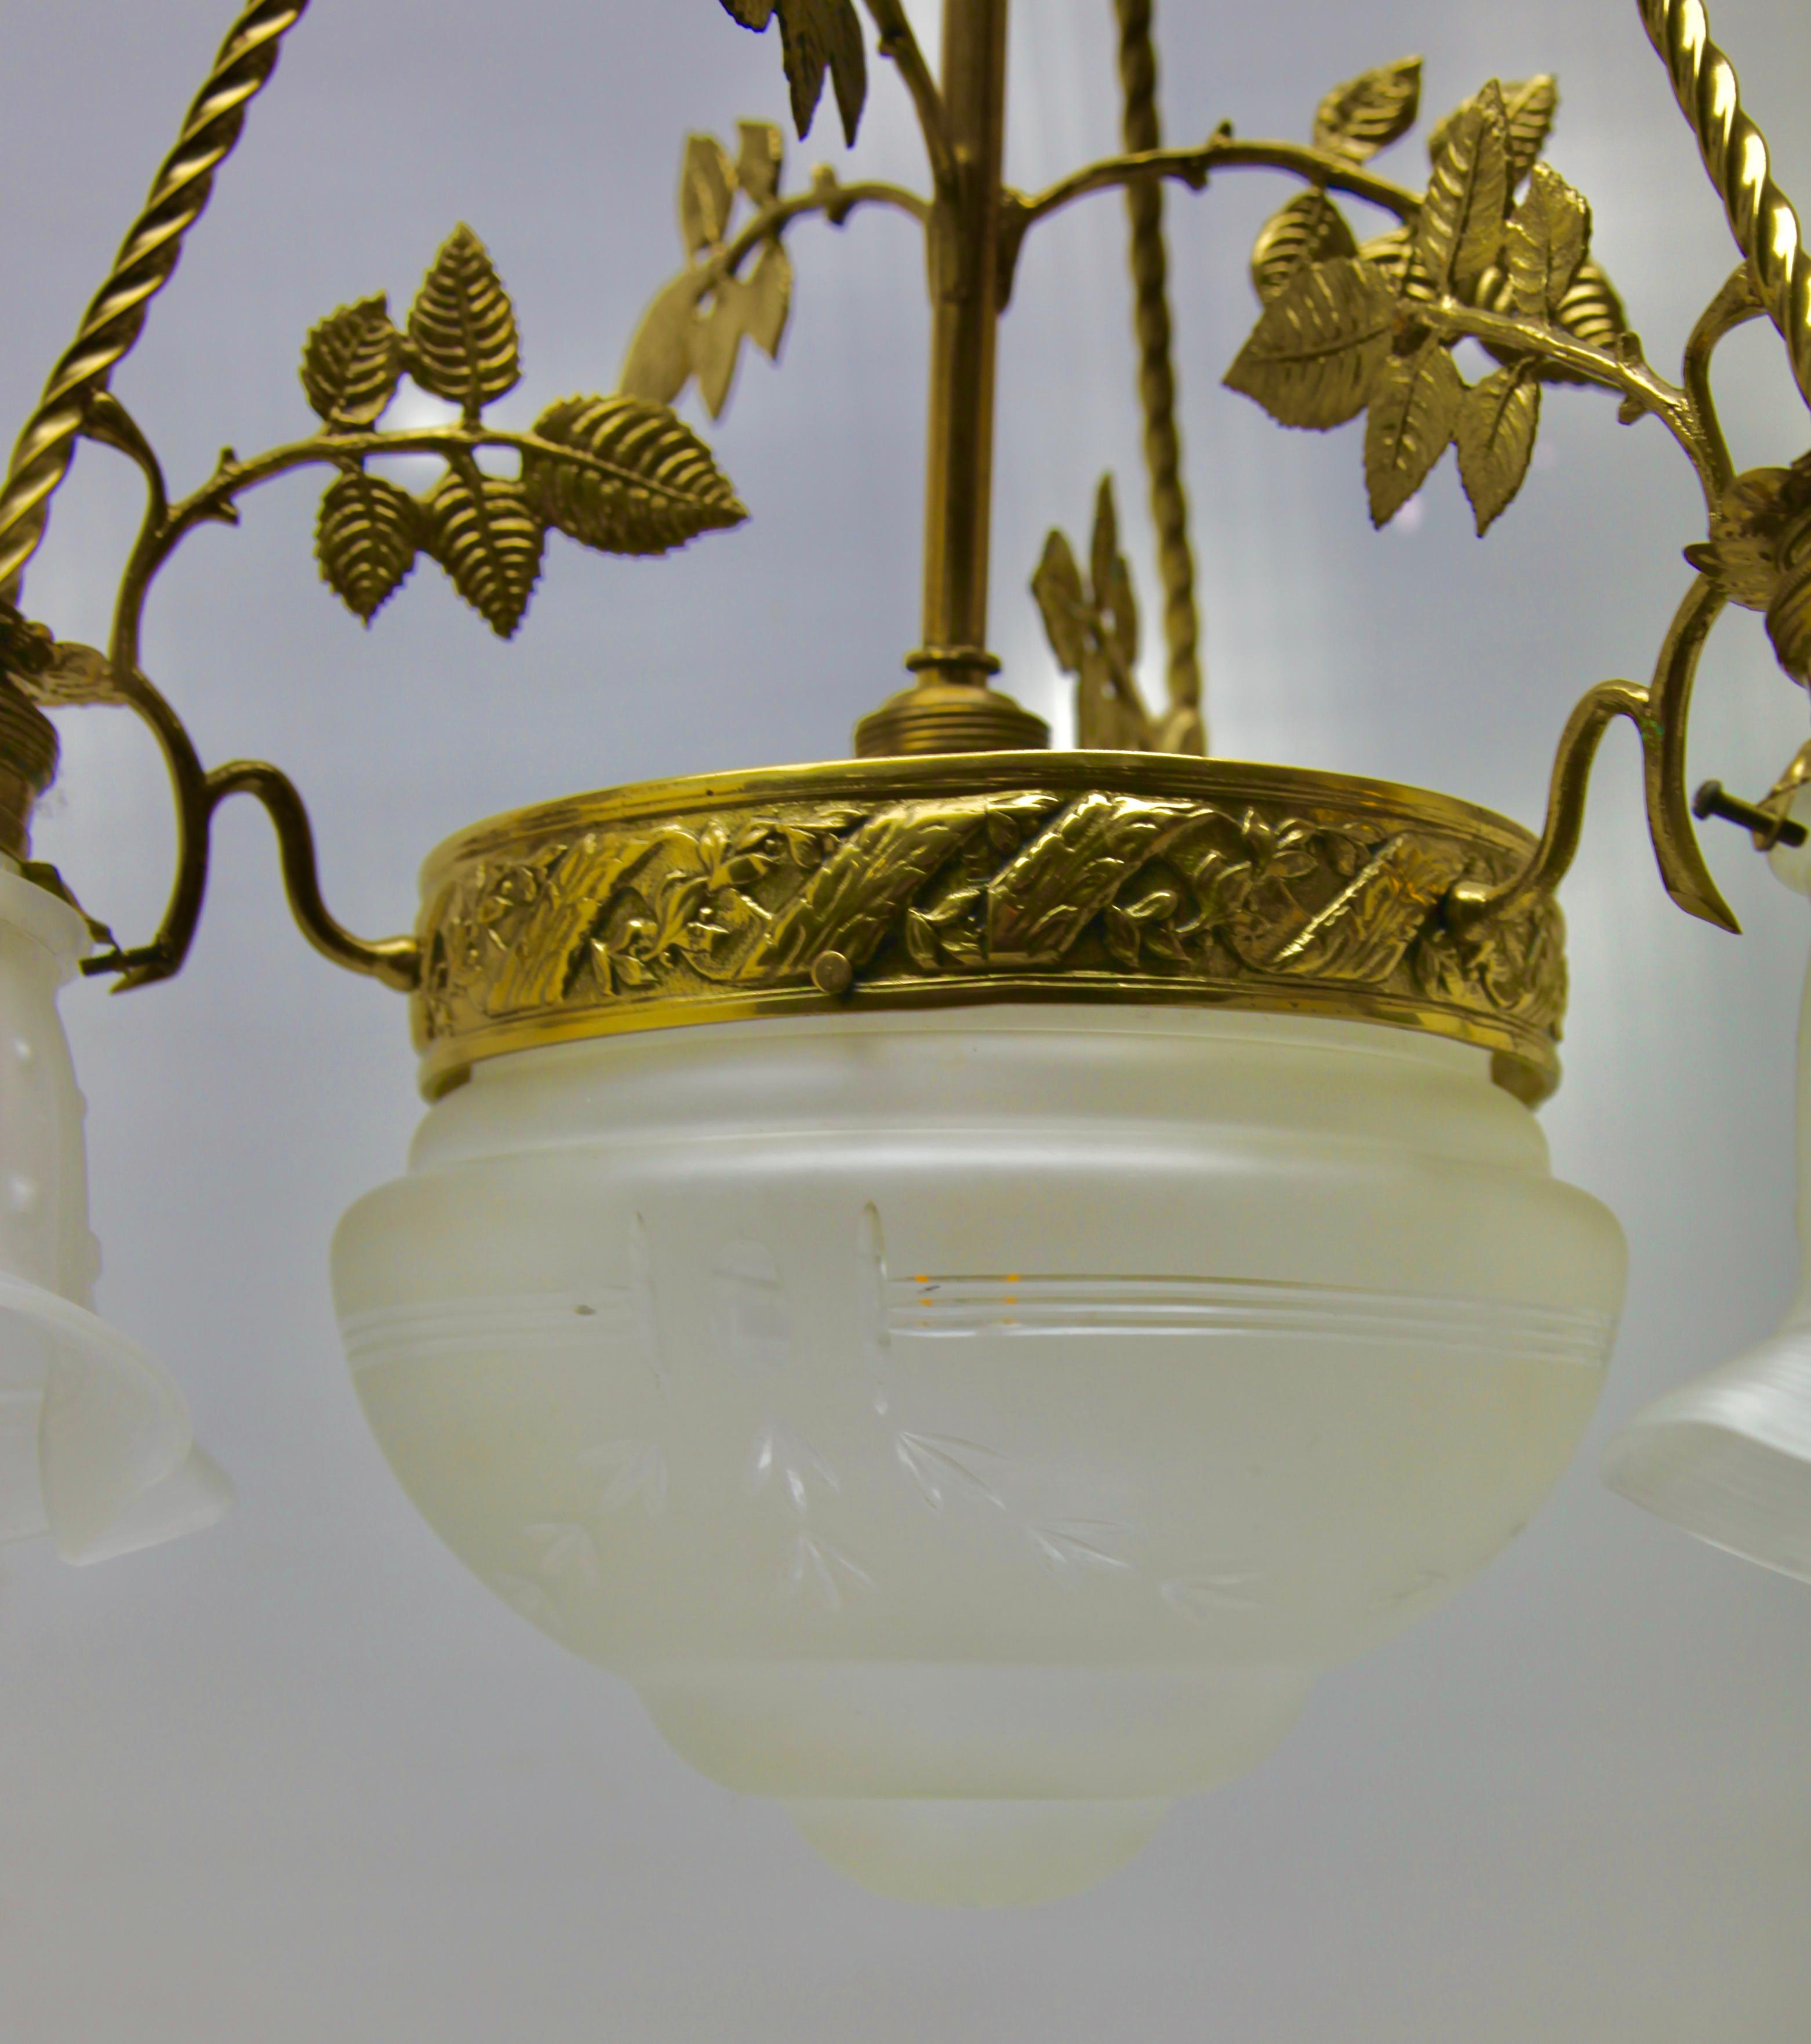 Early 20th Century Art Nouveau Pendent Chandelier Brass with Tree-Arms 1920s